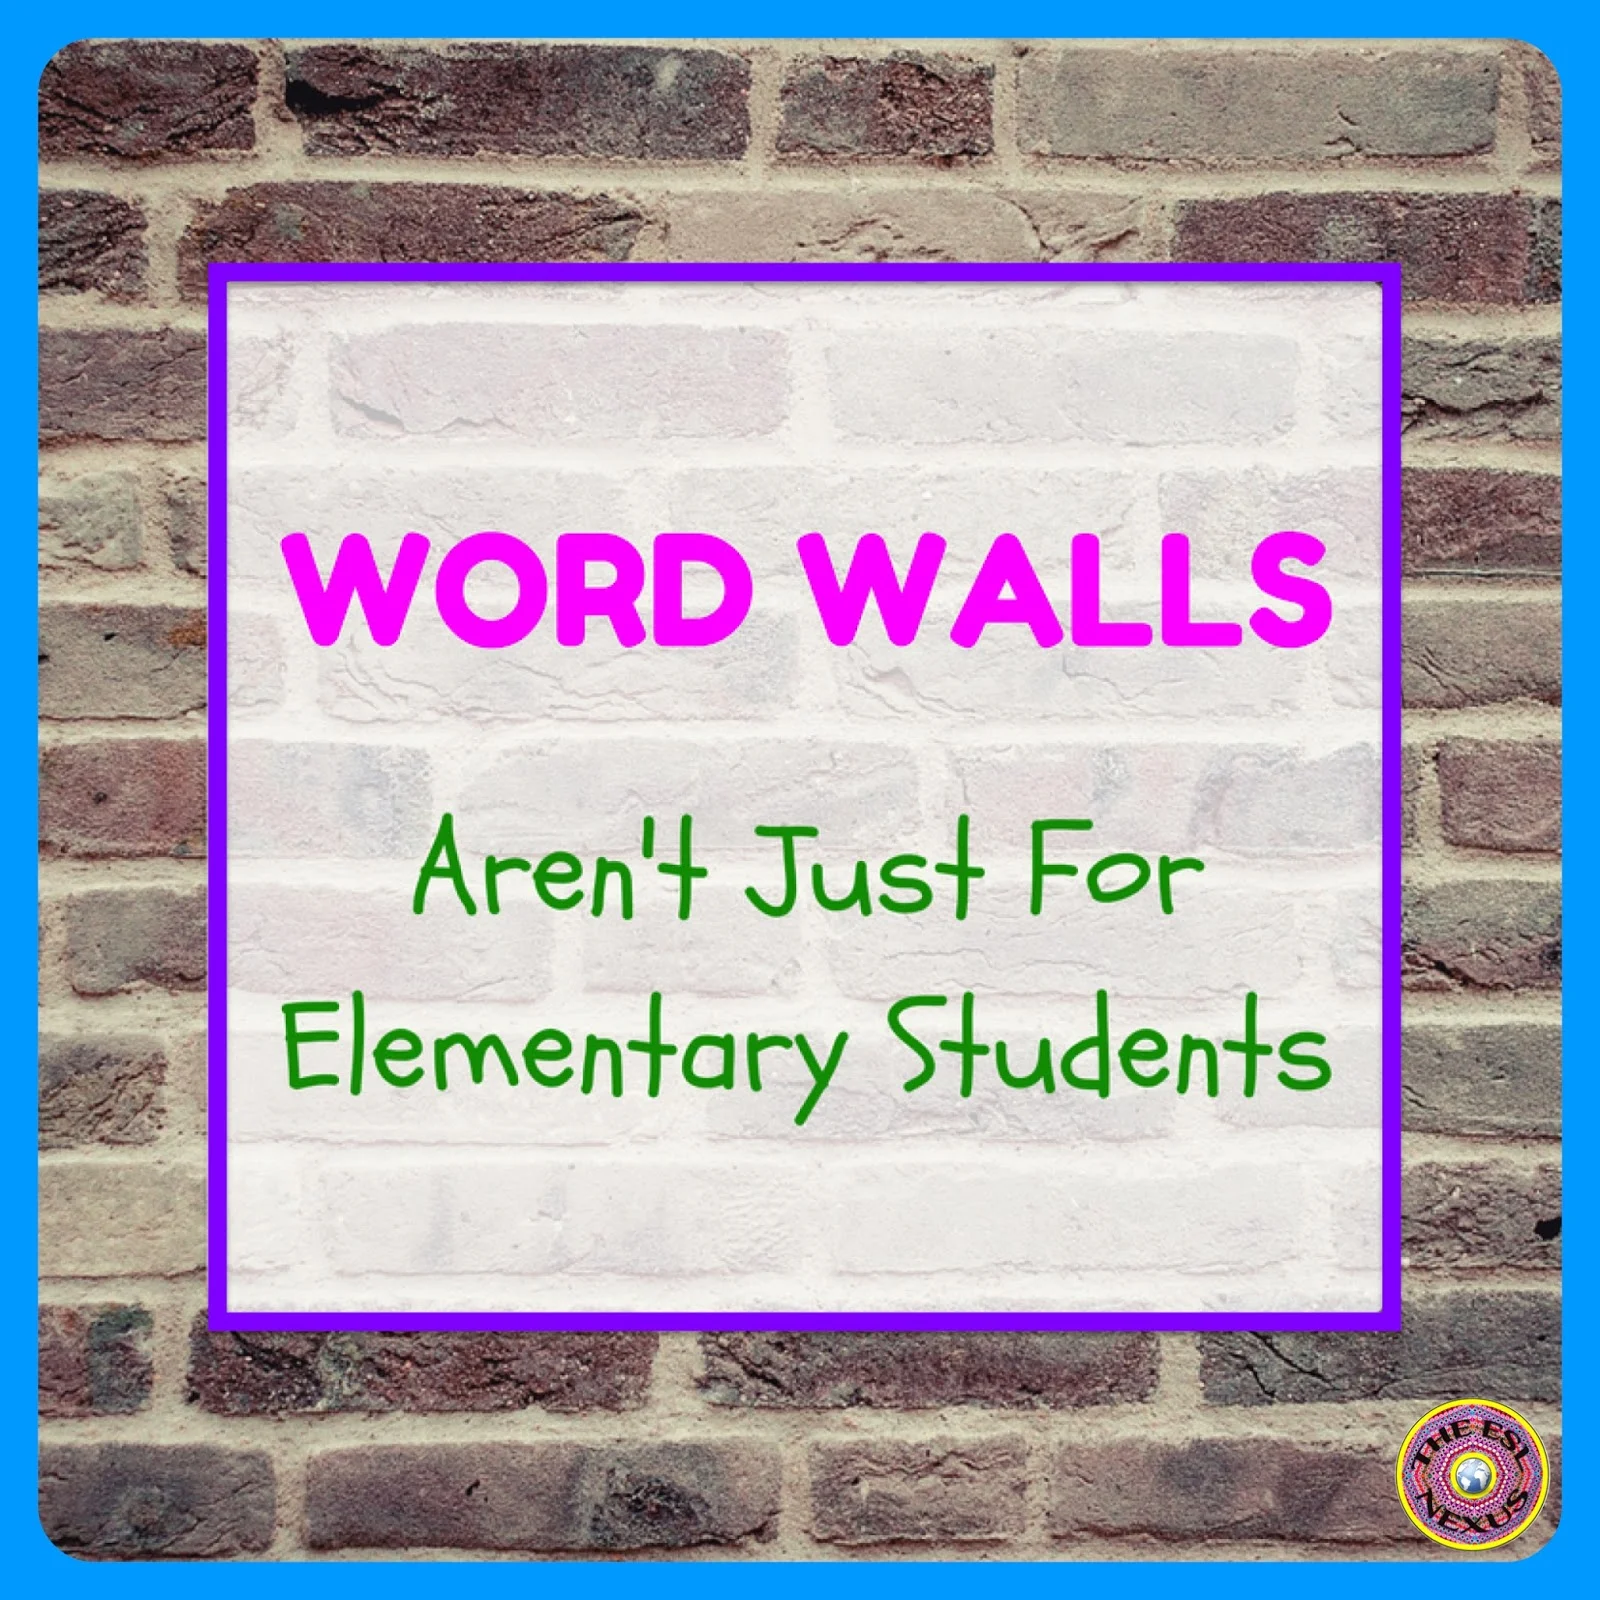 Descriptions of 3 types of word walls used in an ESL classroom | The ESL Connection